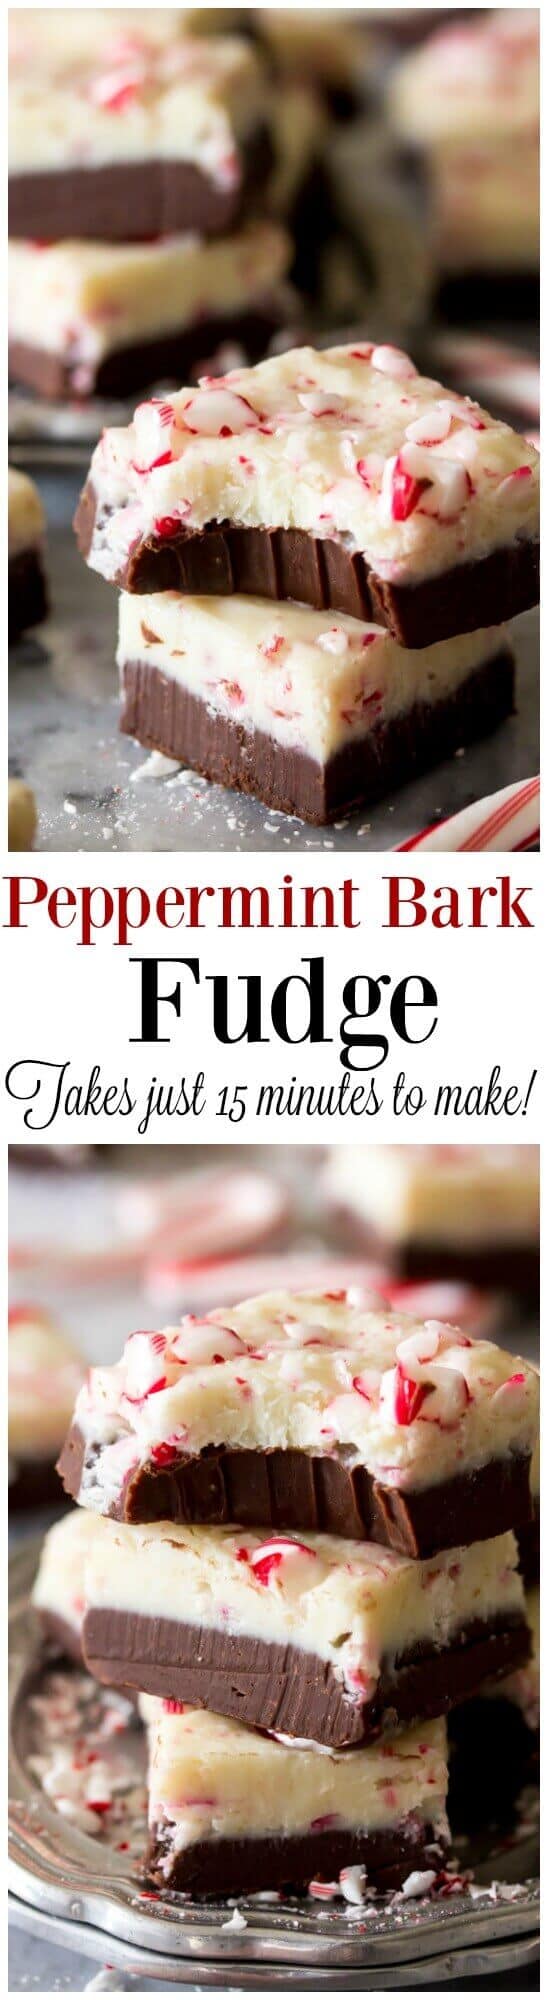 peppermint-bark-fudge-made-in-just-15-minutes-without-a-candy-thermometer-sugar-spun-run